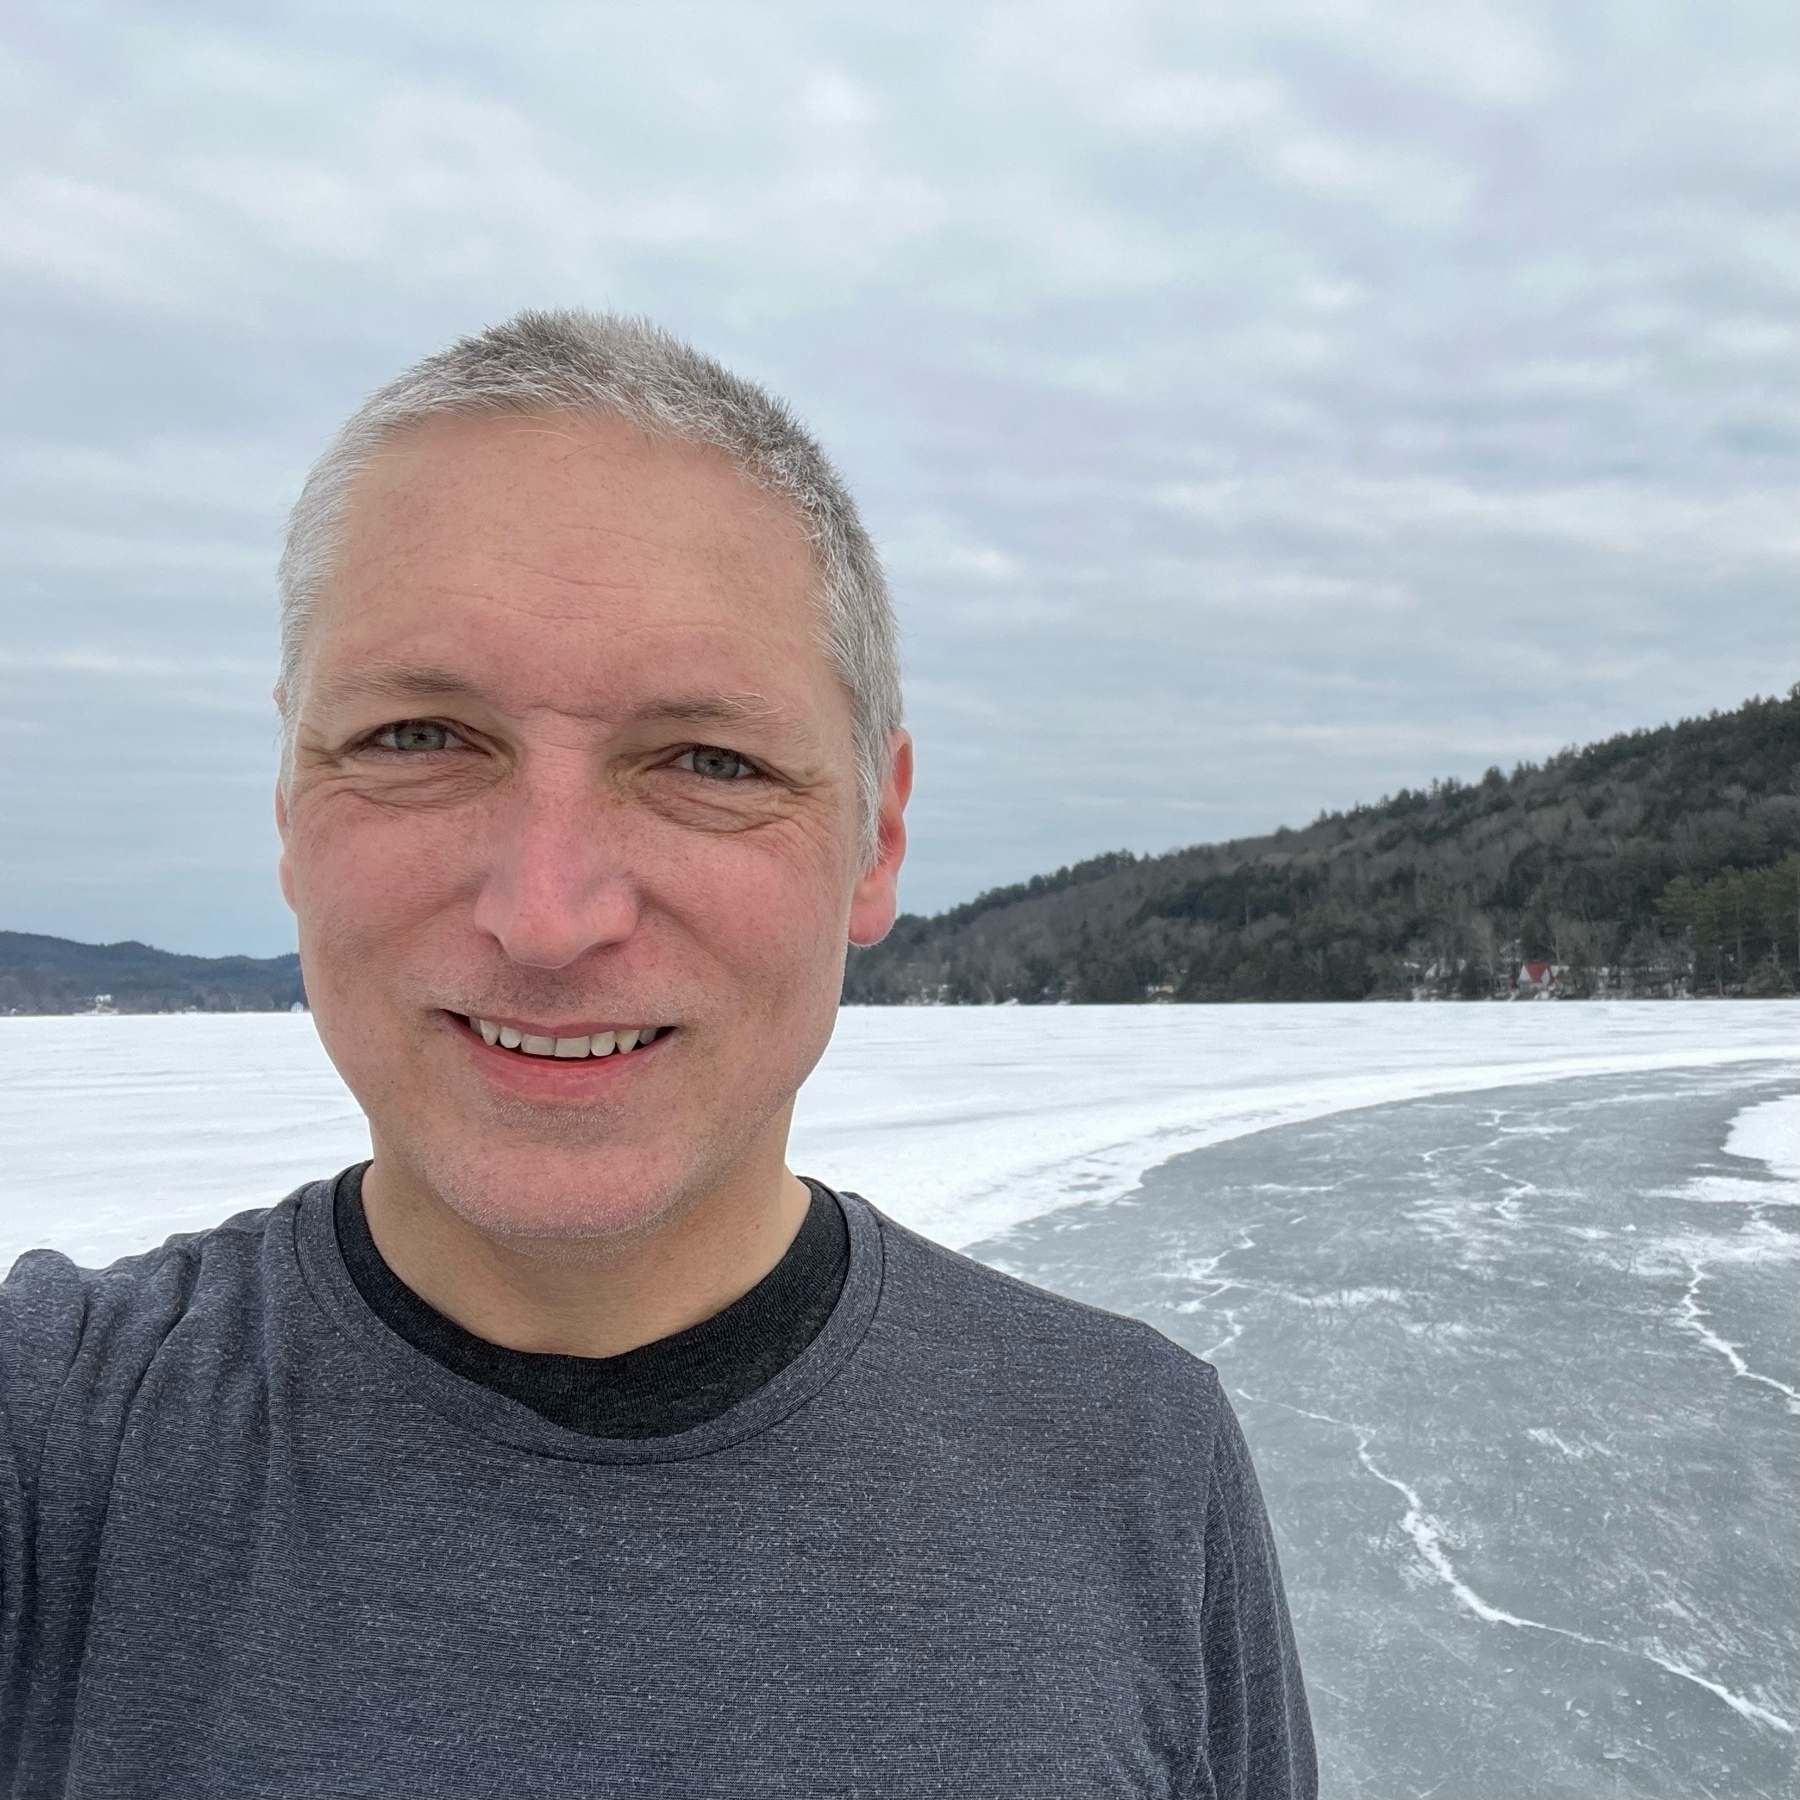 selfie in black thermal shirt against snowy backdrop with cleared "river" of skating ice